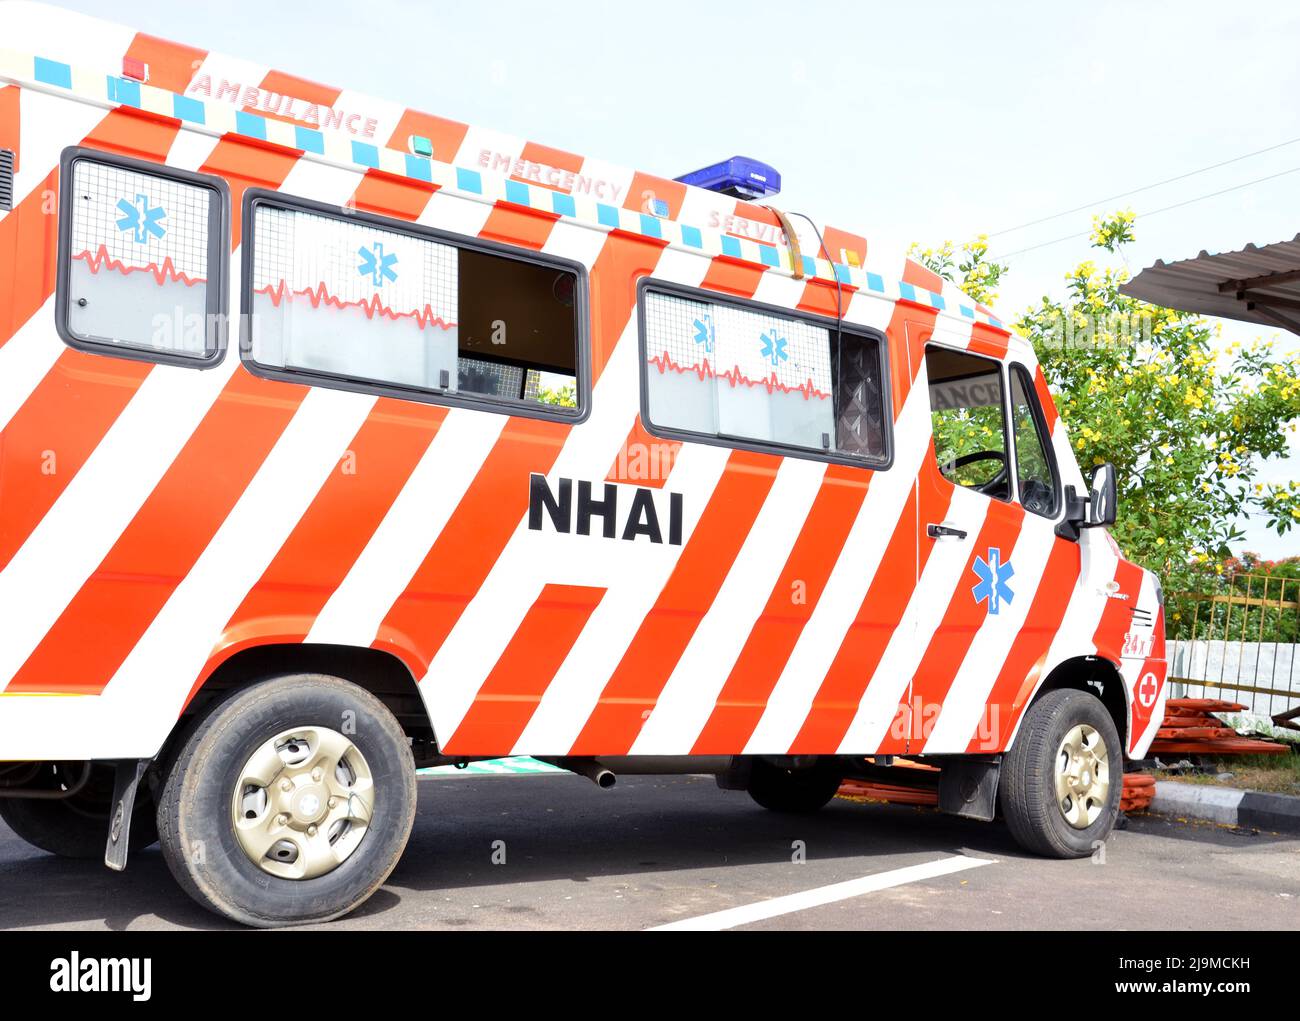 The National highway authority of India(NHAI) emergency ambulance vehicle parked on the road captured at a highway in Chennai, India. Stock Photo